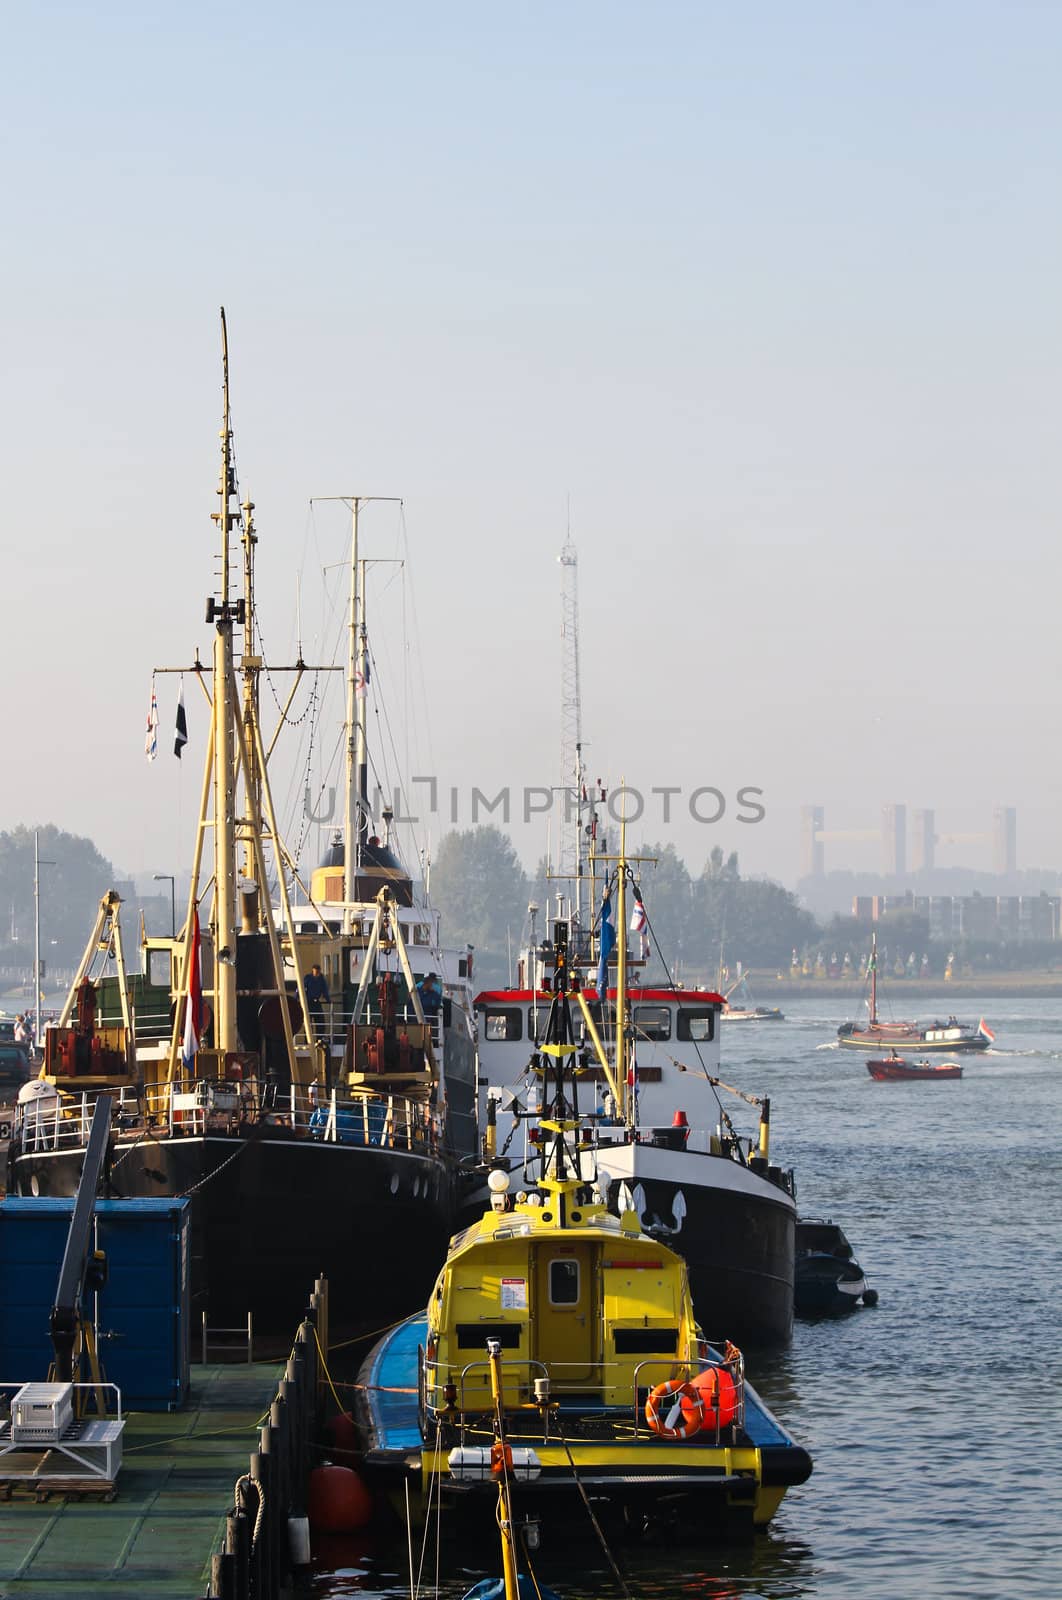 Ships in harbor and on the river by Colette